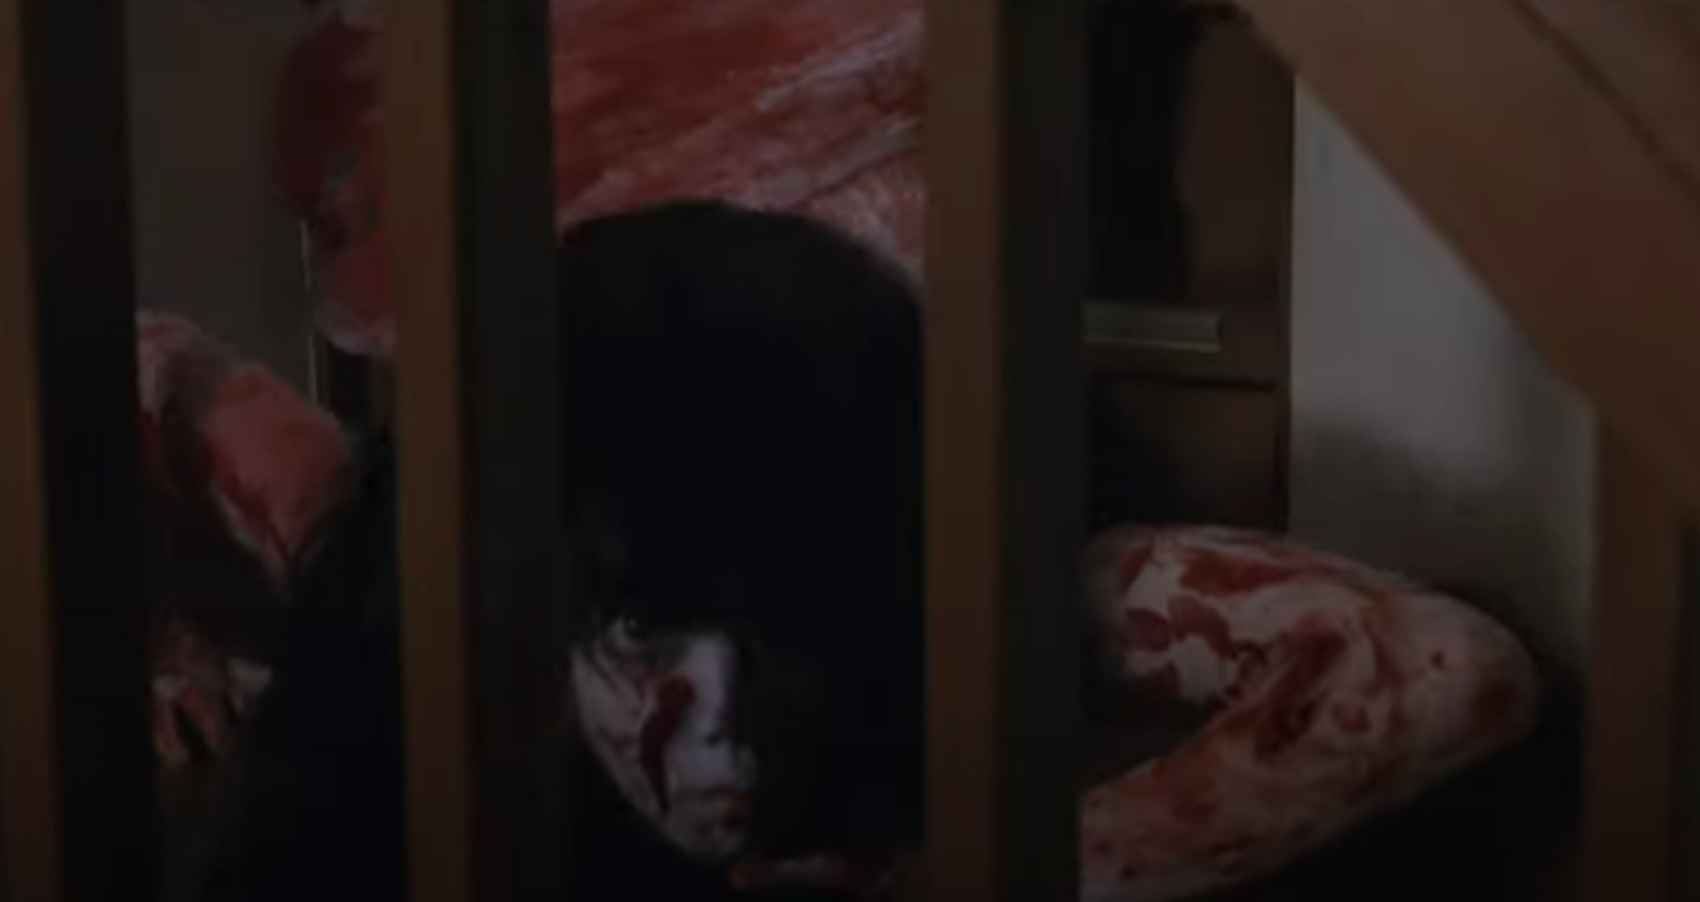 A spooky kid covered in blood and looking through bars